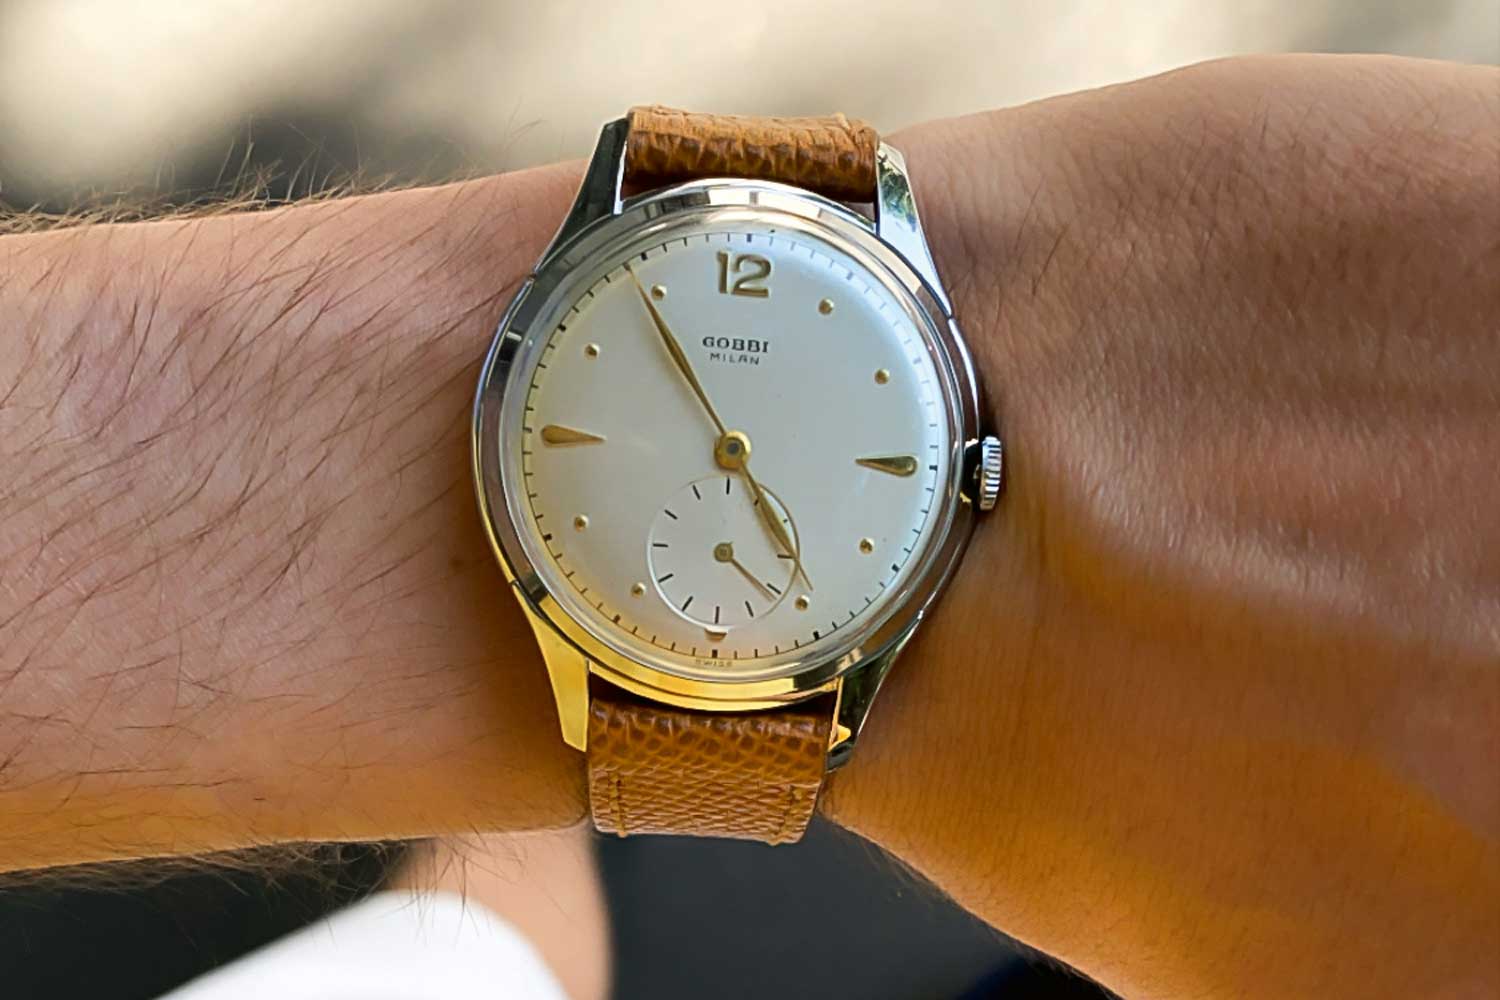 Oversized “Calatrava” style with clean dial and the almighty “Gobbi” stamp on the dial